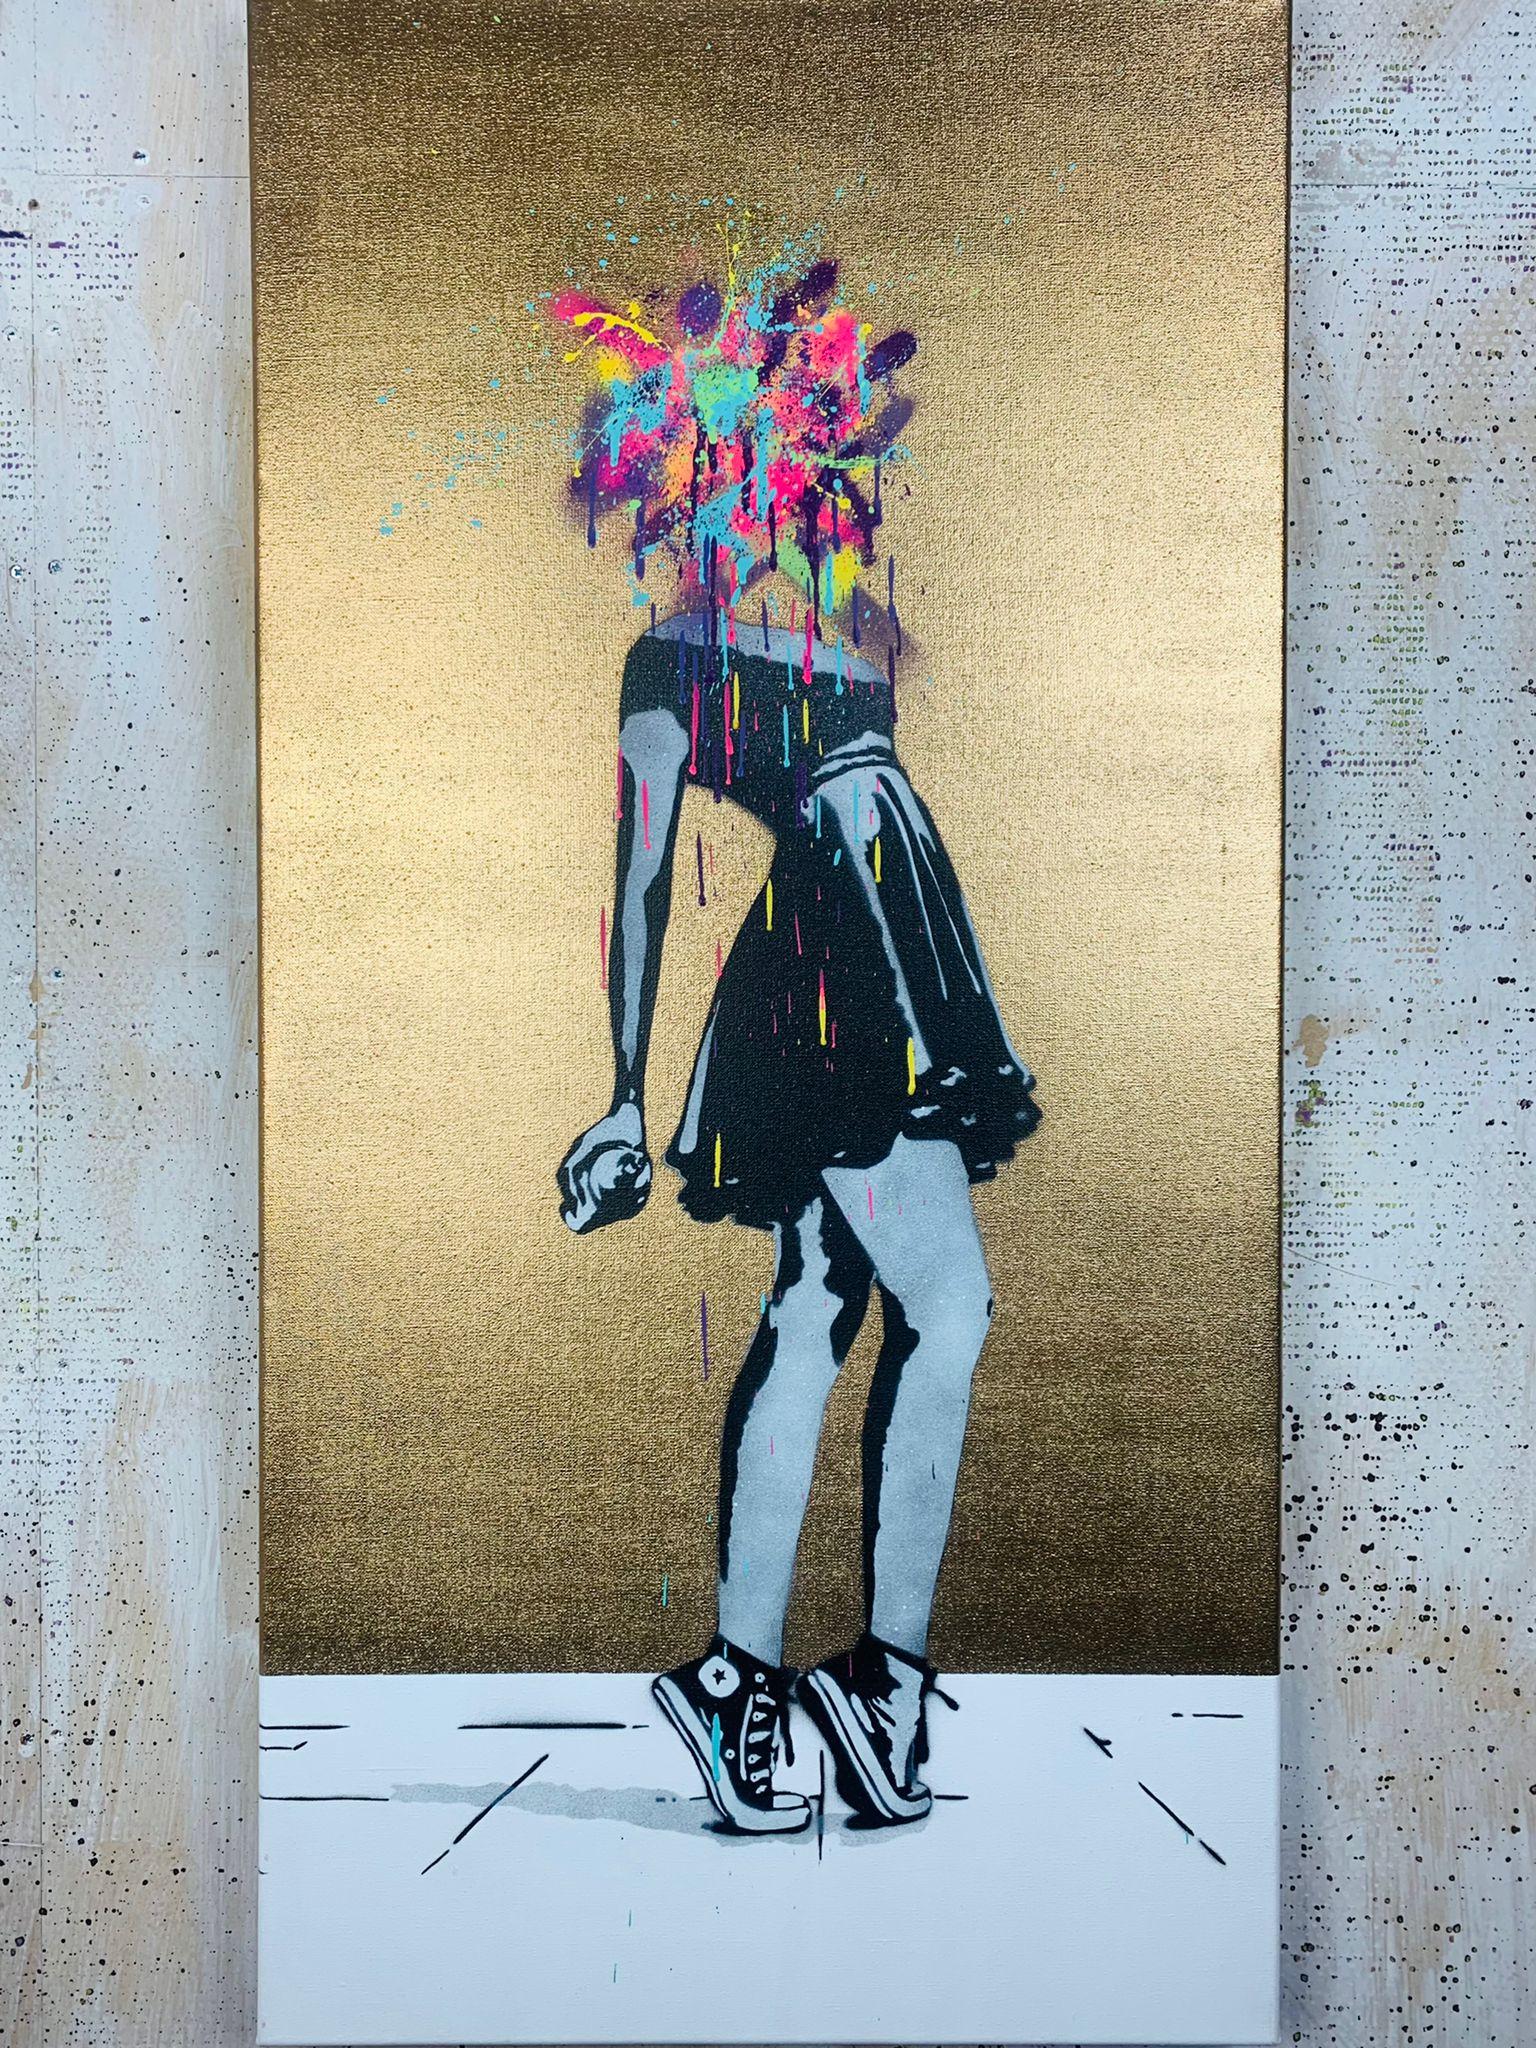 To Erase Canvas by PONK (Street Art), 2022 - Painting by PØNK